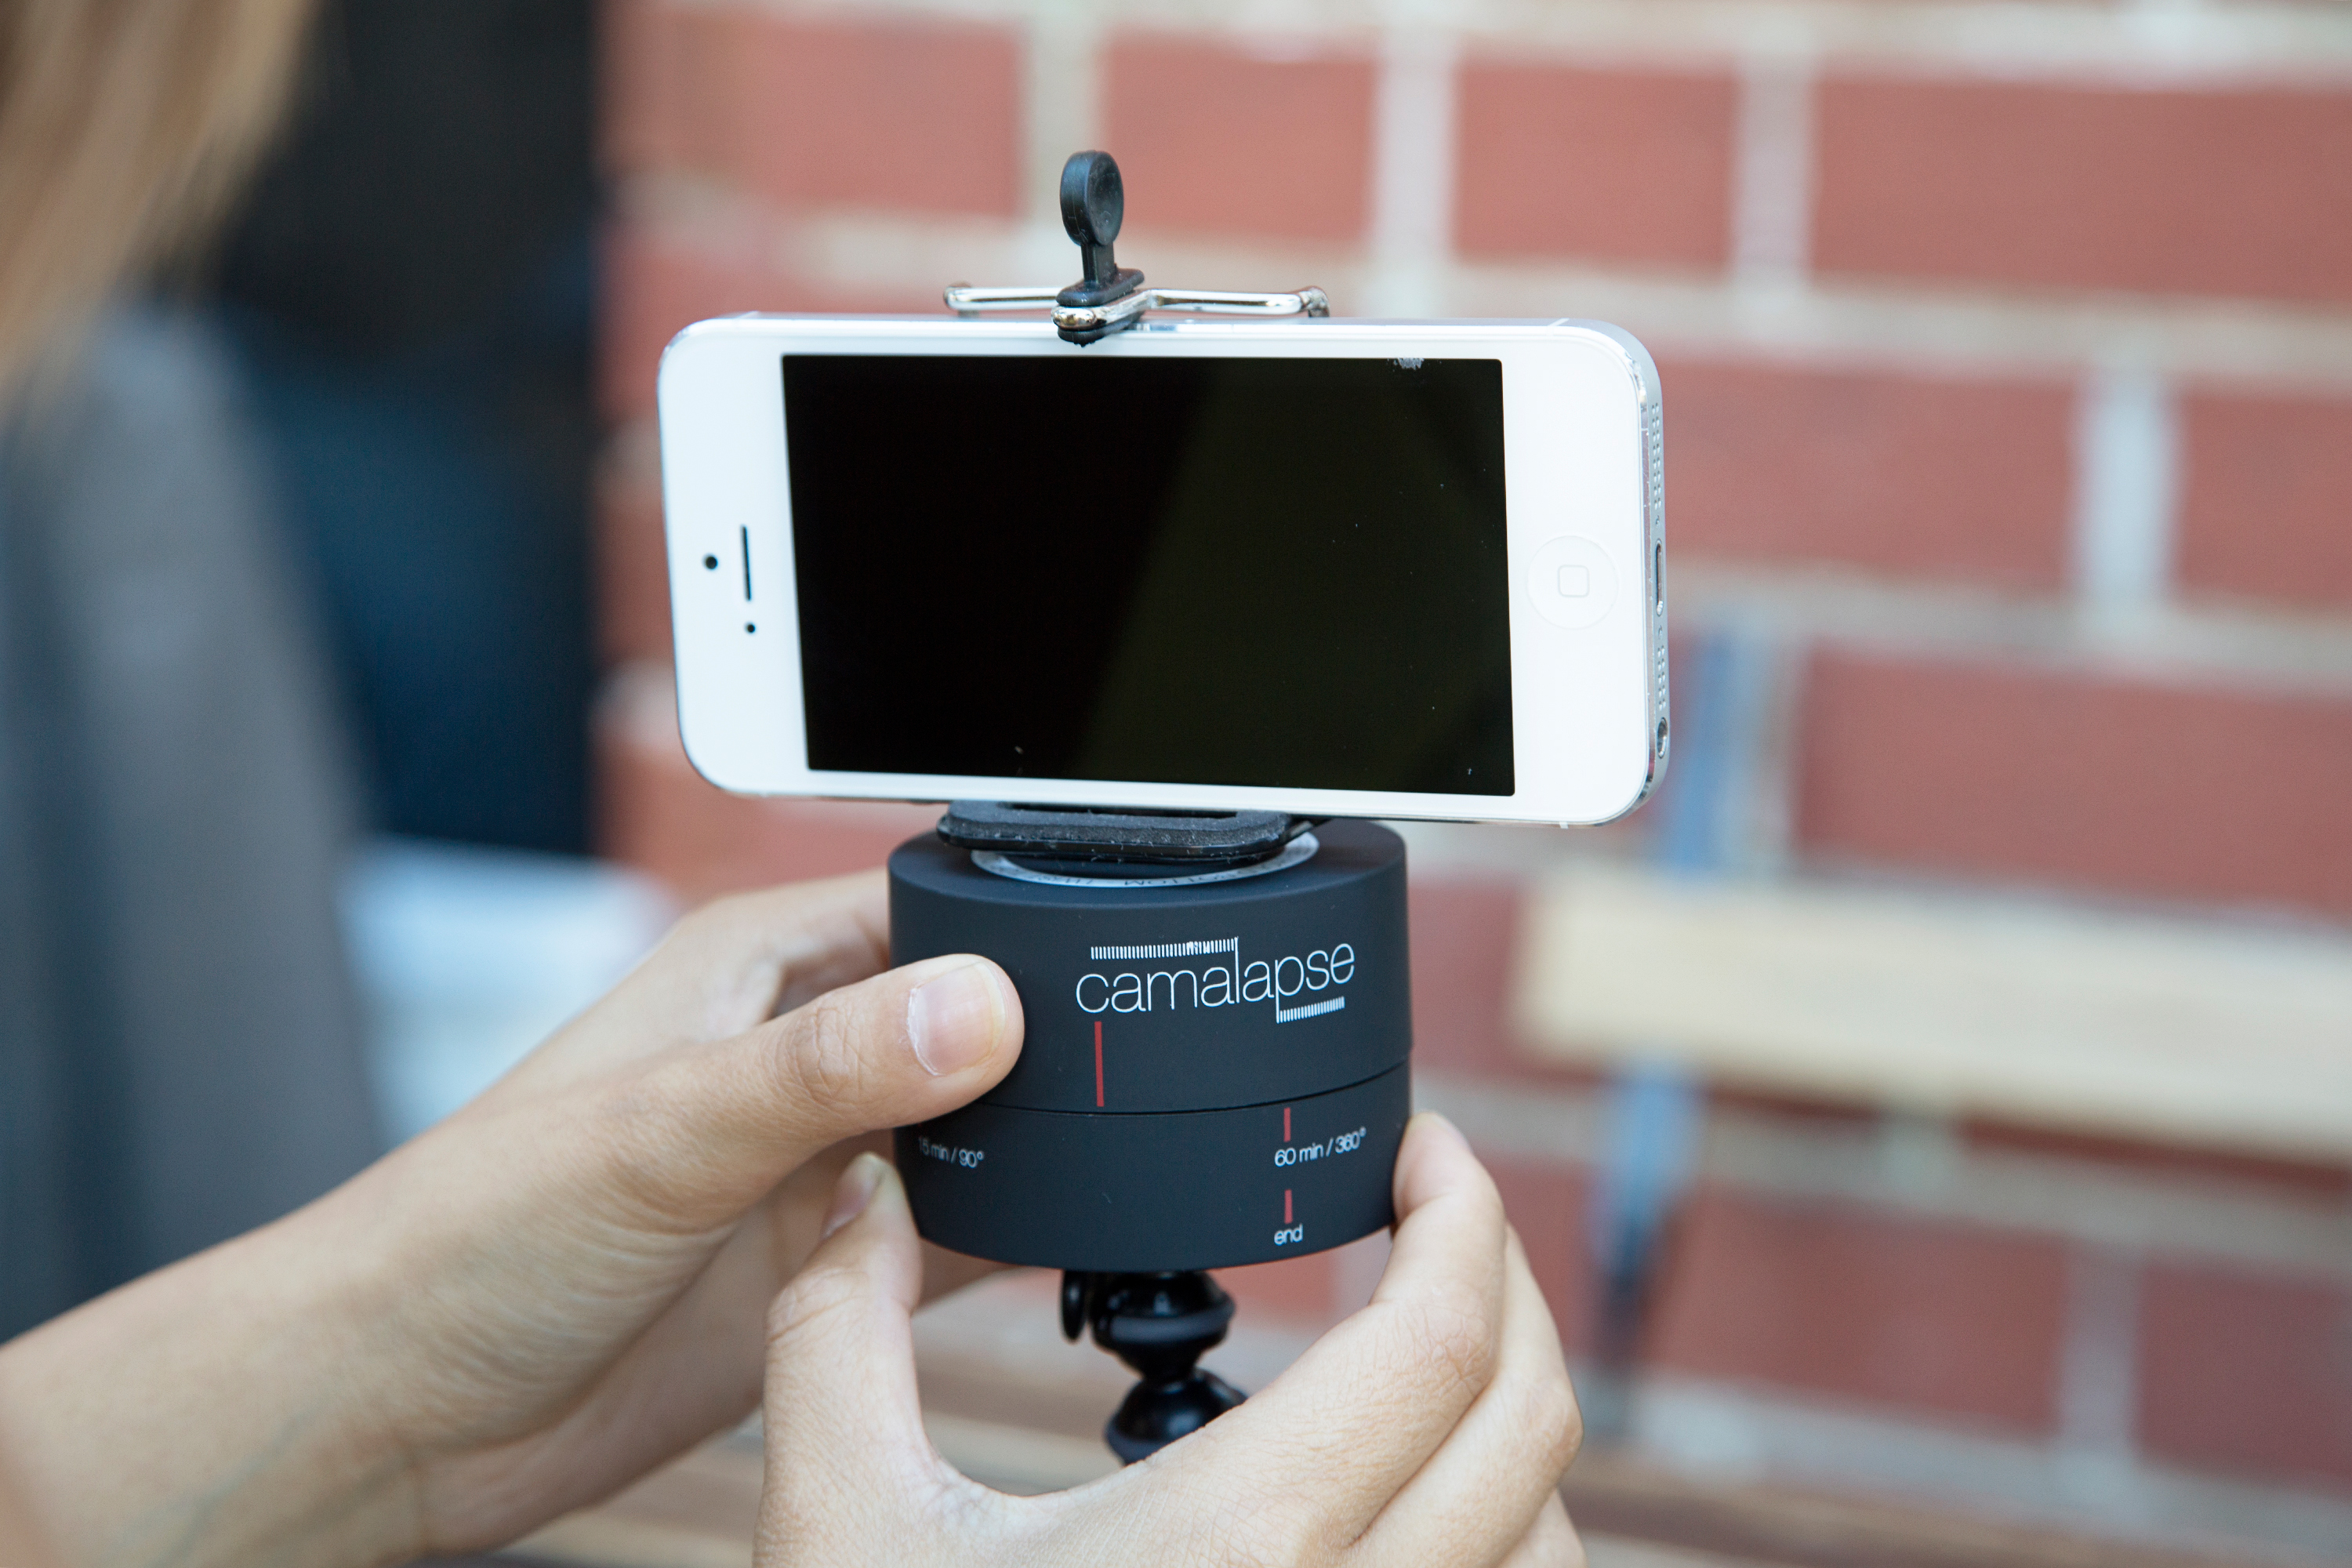 Five great camera accessories for your iPhone - ShinyShiny